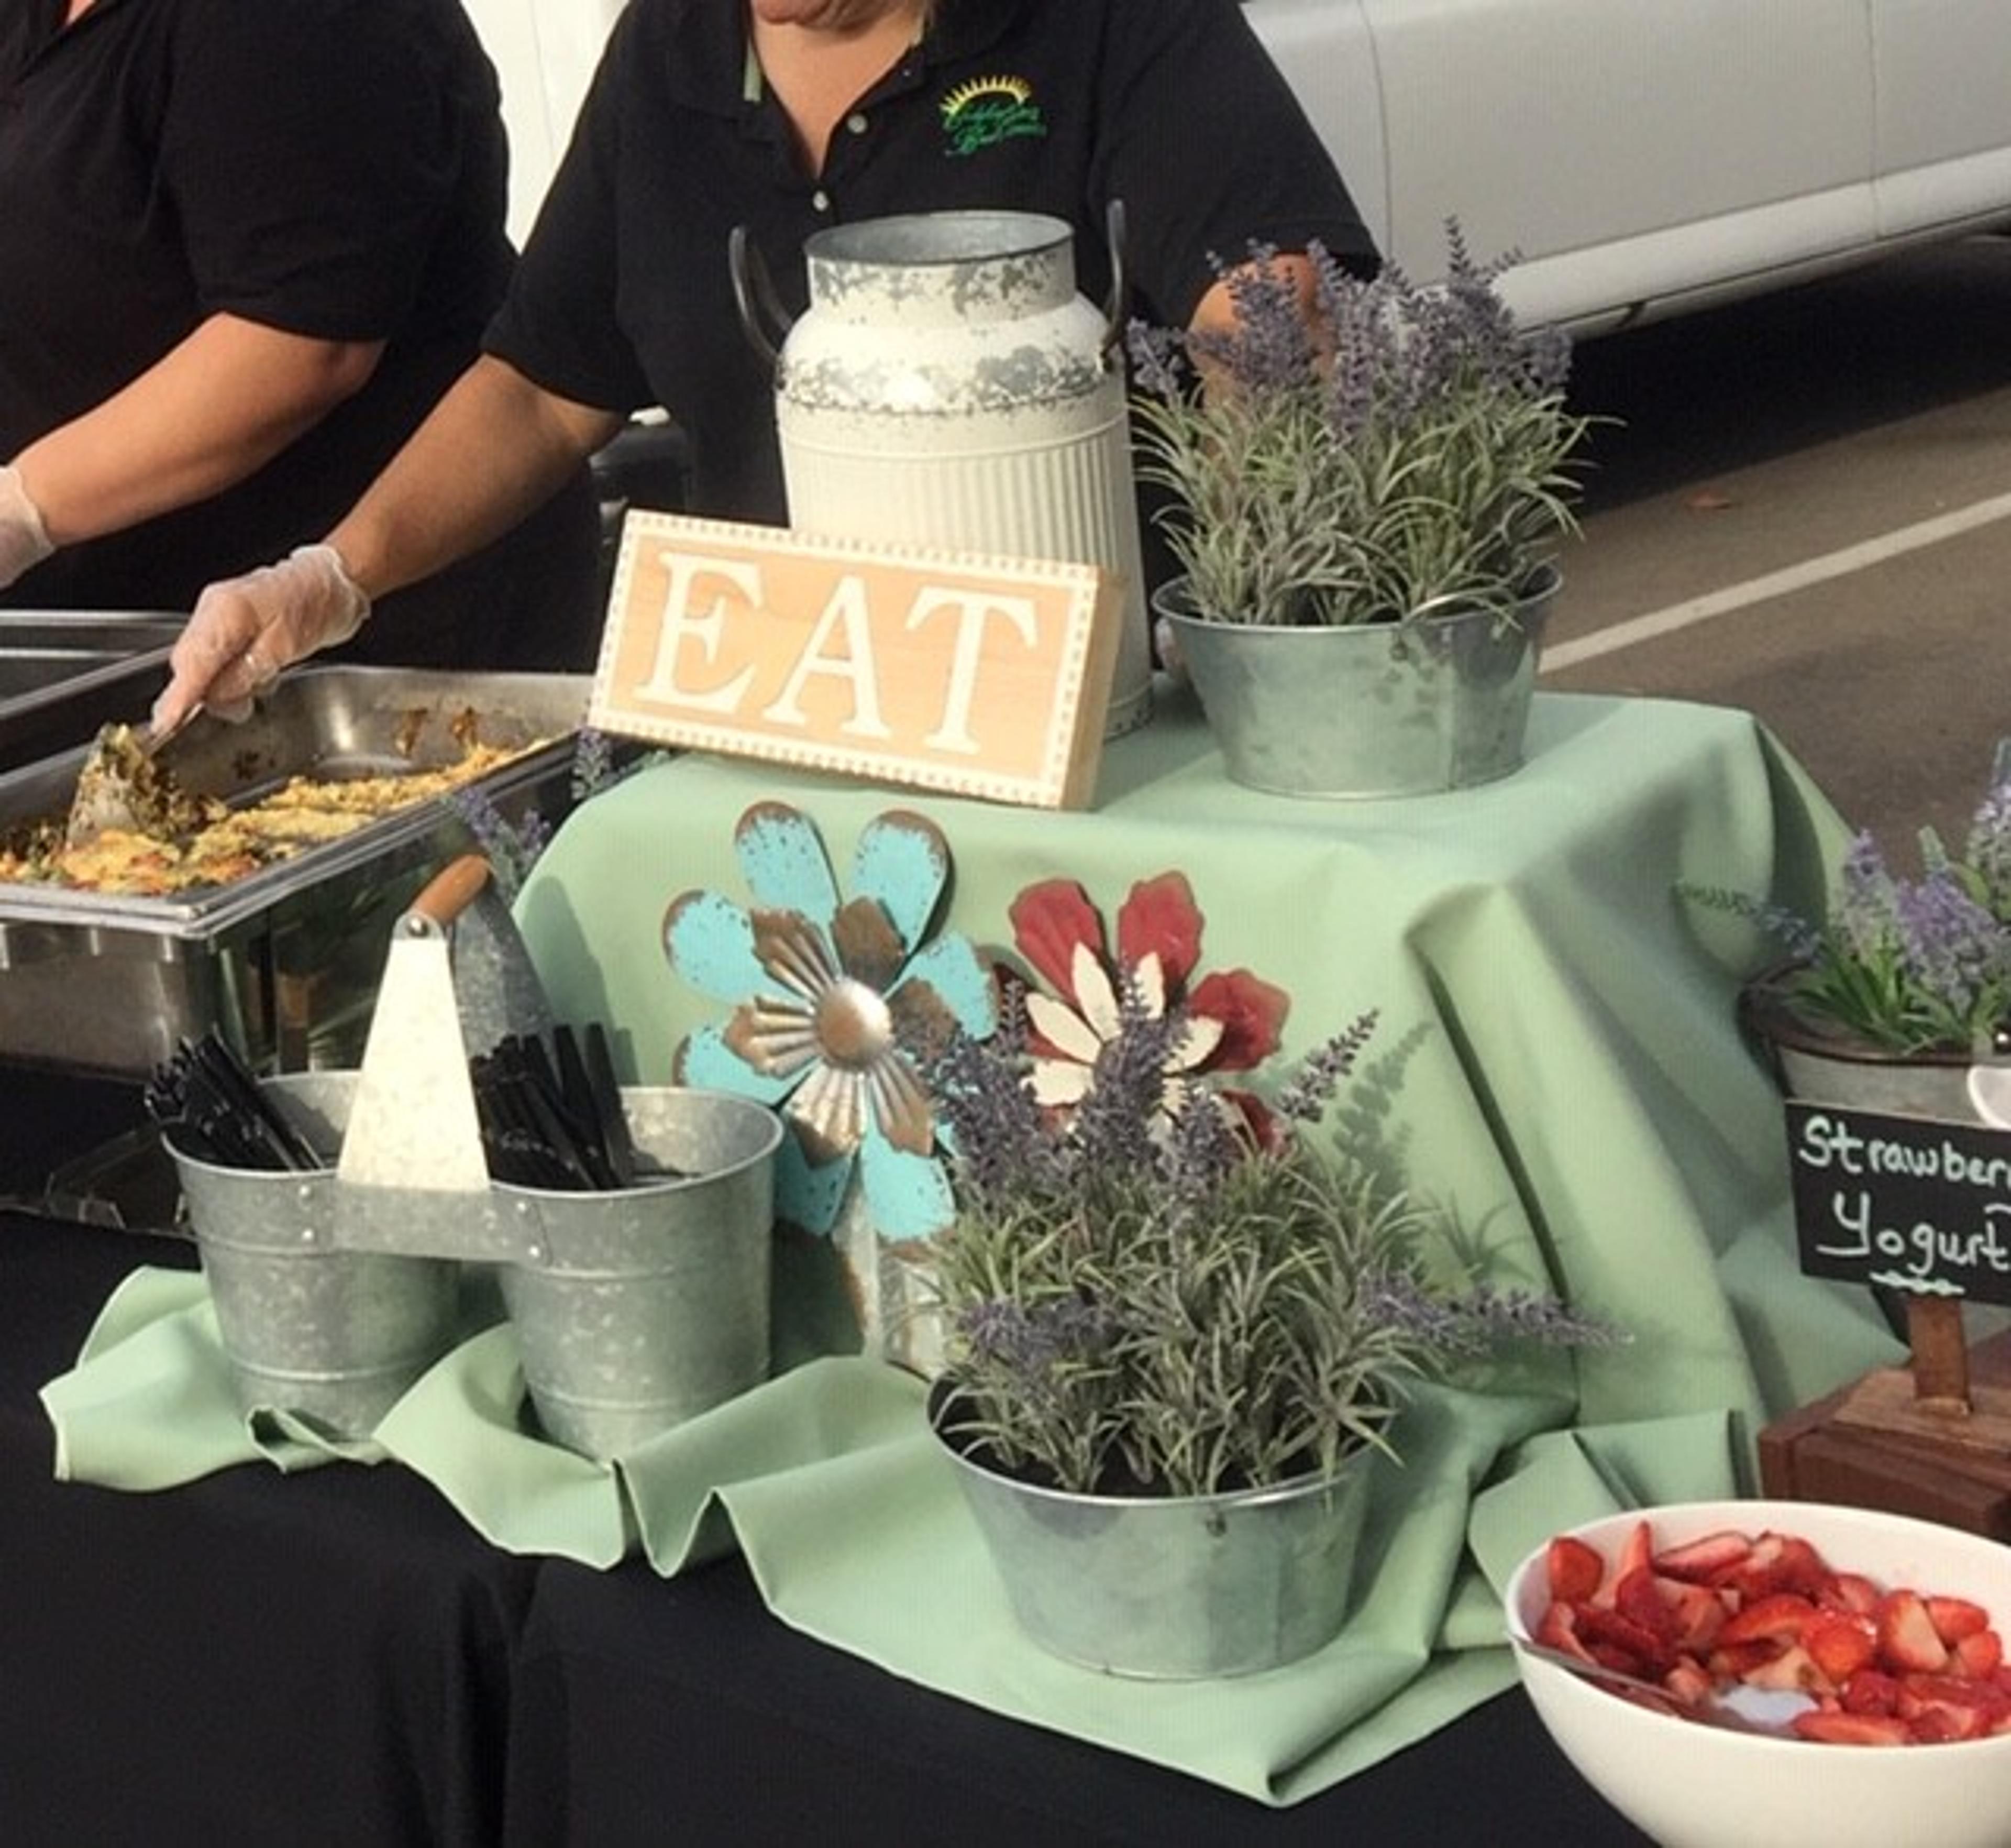 California's Best Catering & Events